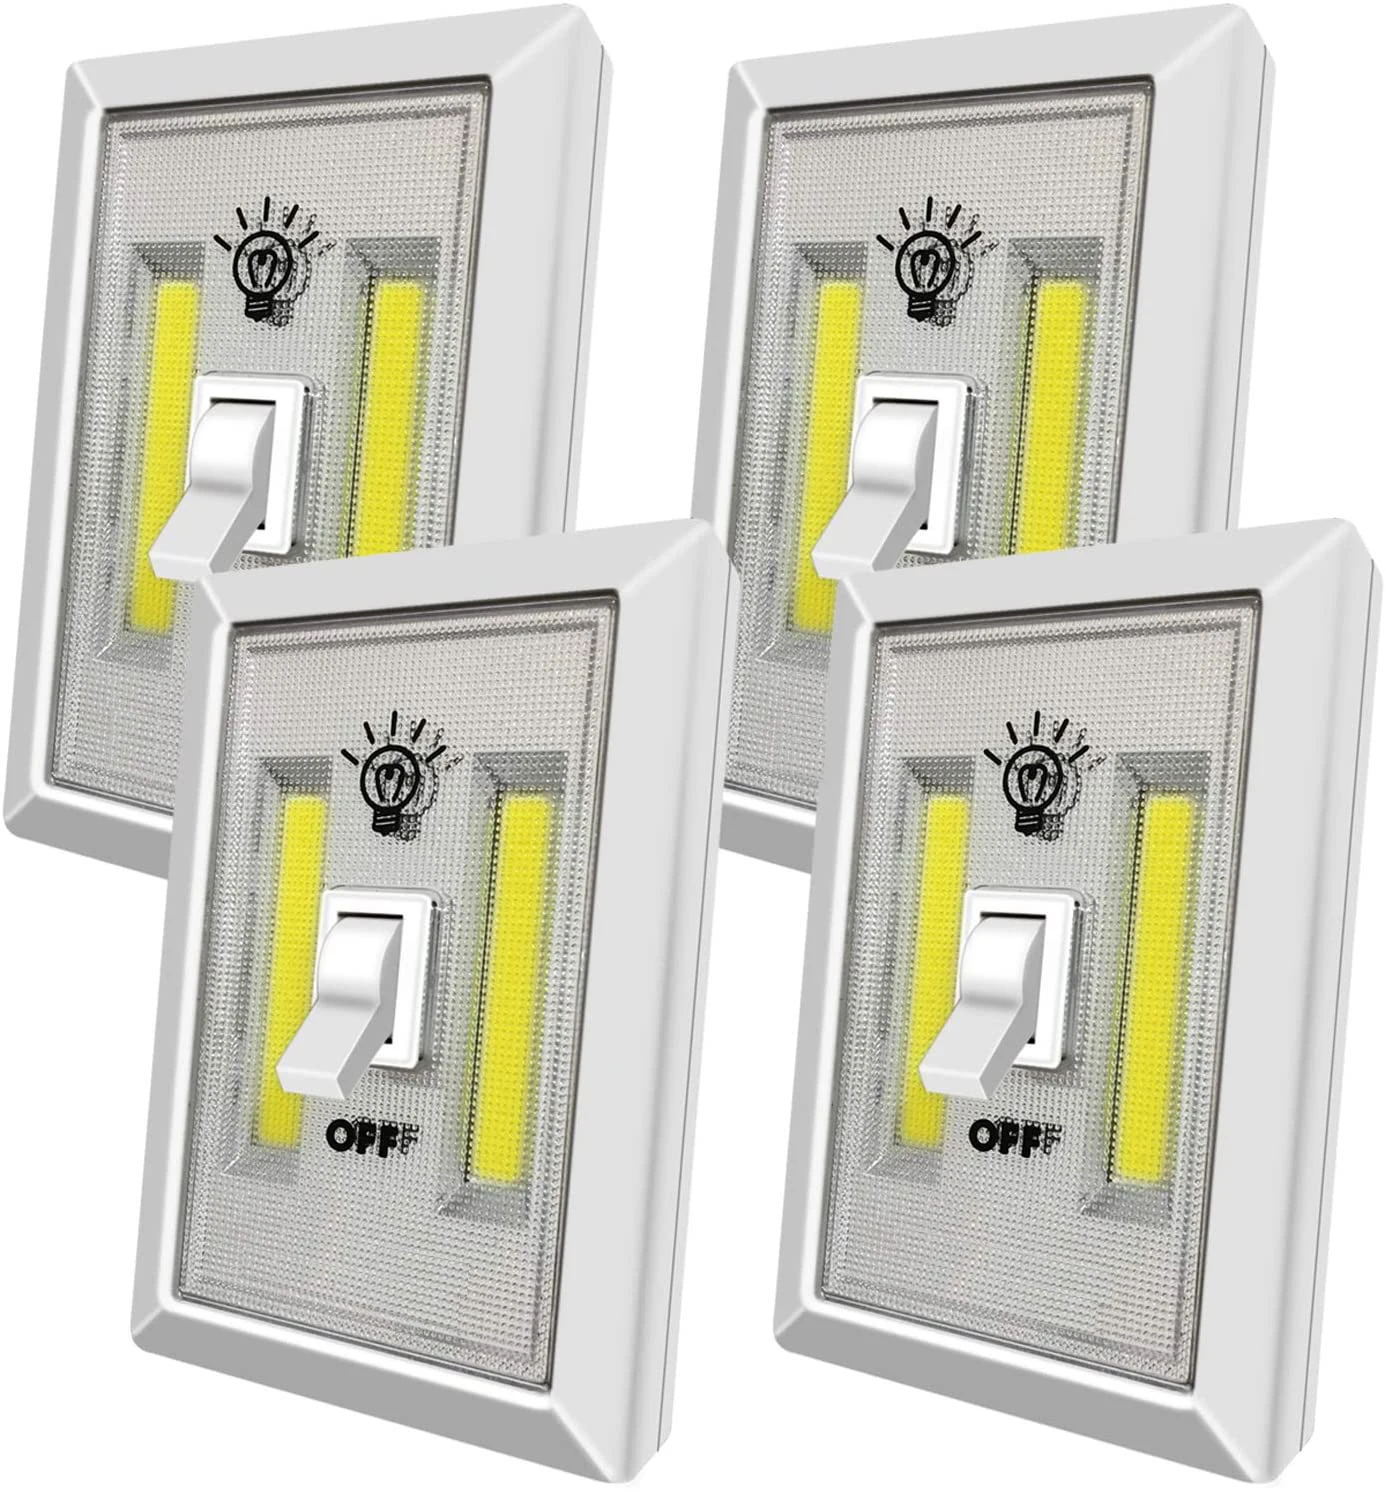 MULTI-PUPOSE LIGHT switch Battery Operated light for Under Cabinet, Shelf, Closet, Garage, Kitchen, Stairwell